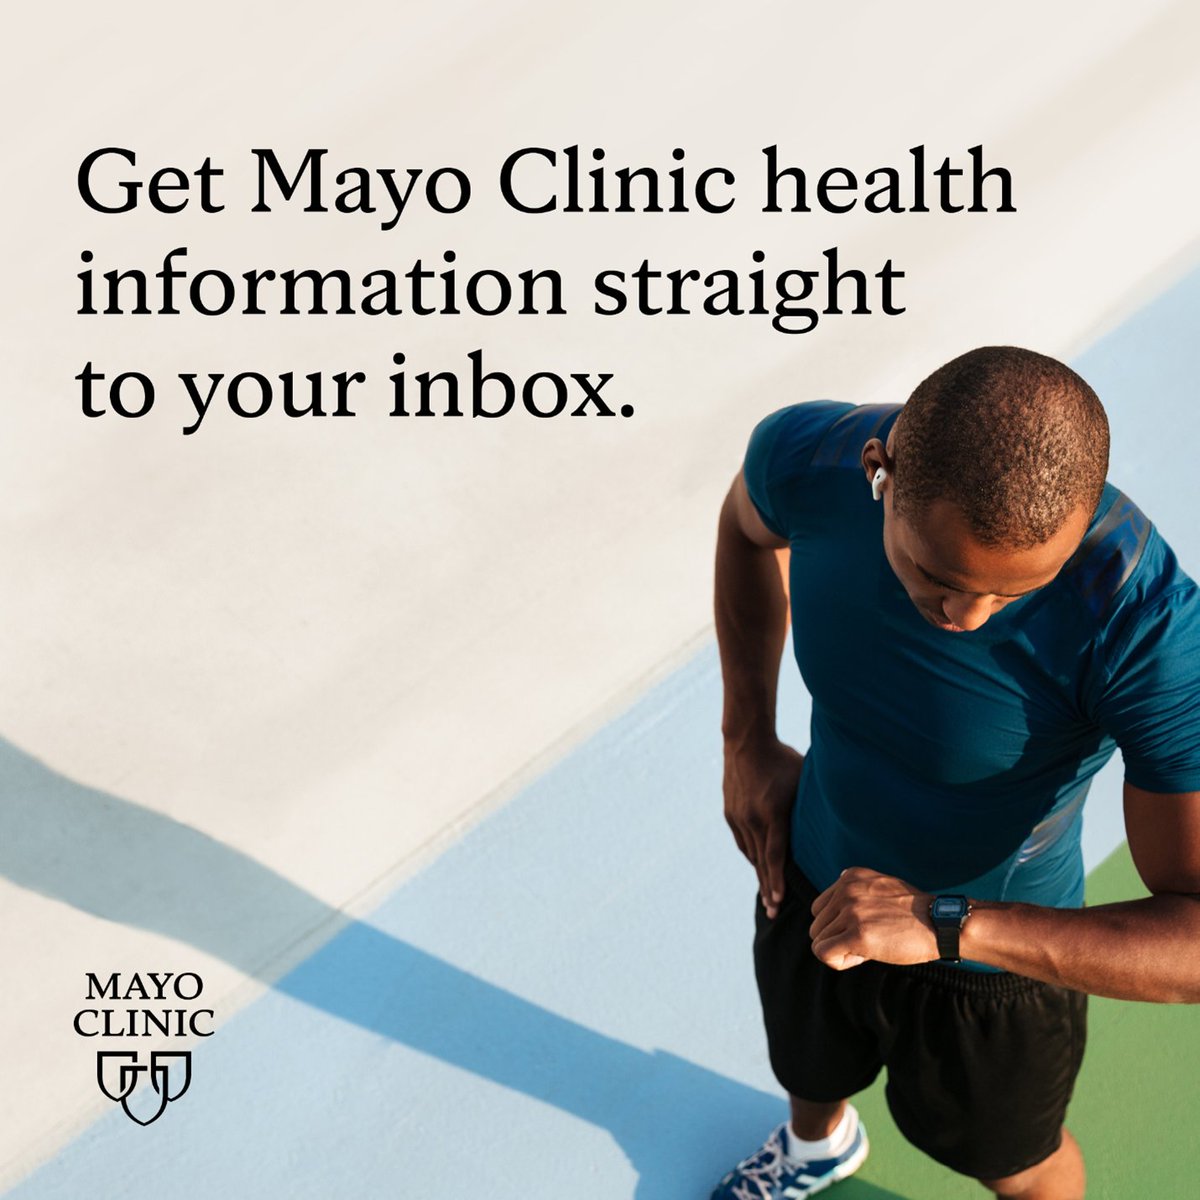 Be the first to know about new health information from Mayo Clinic’s experts. Sign up today → mayocl.in/37mwwJ6